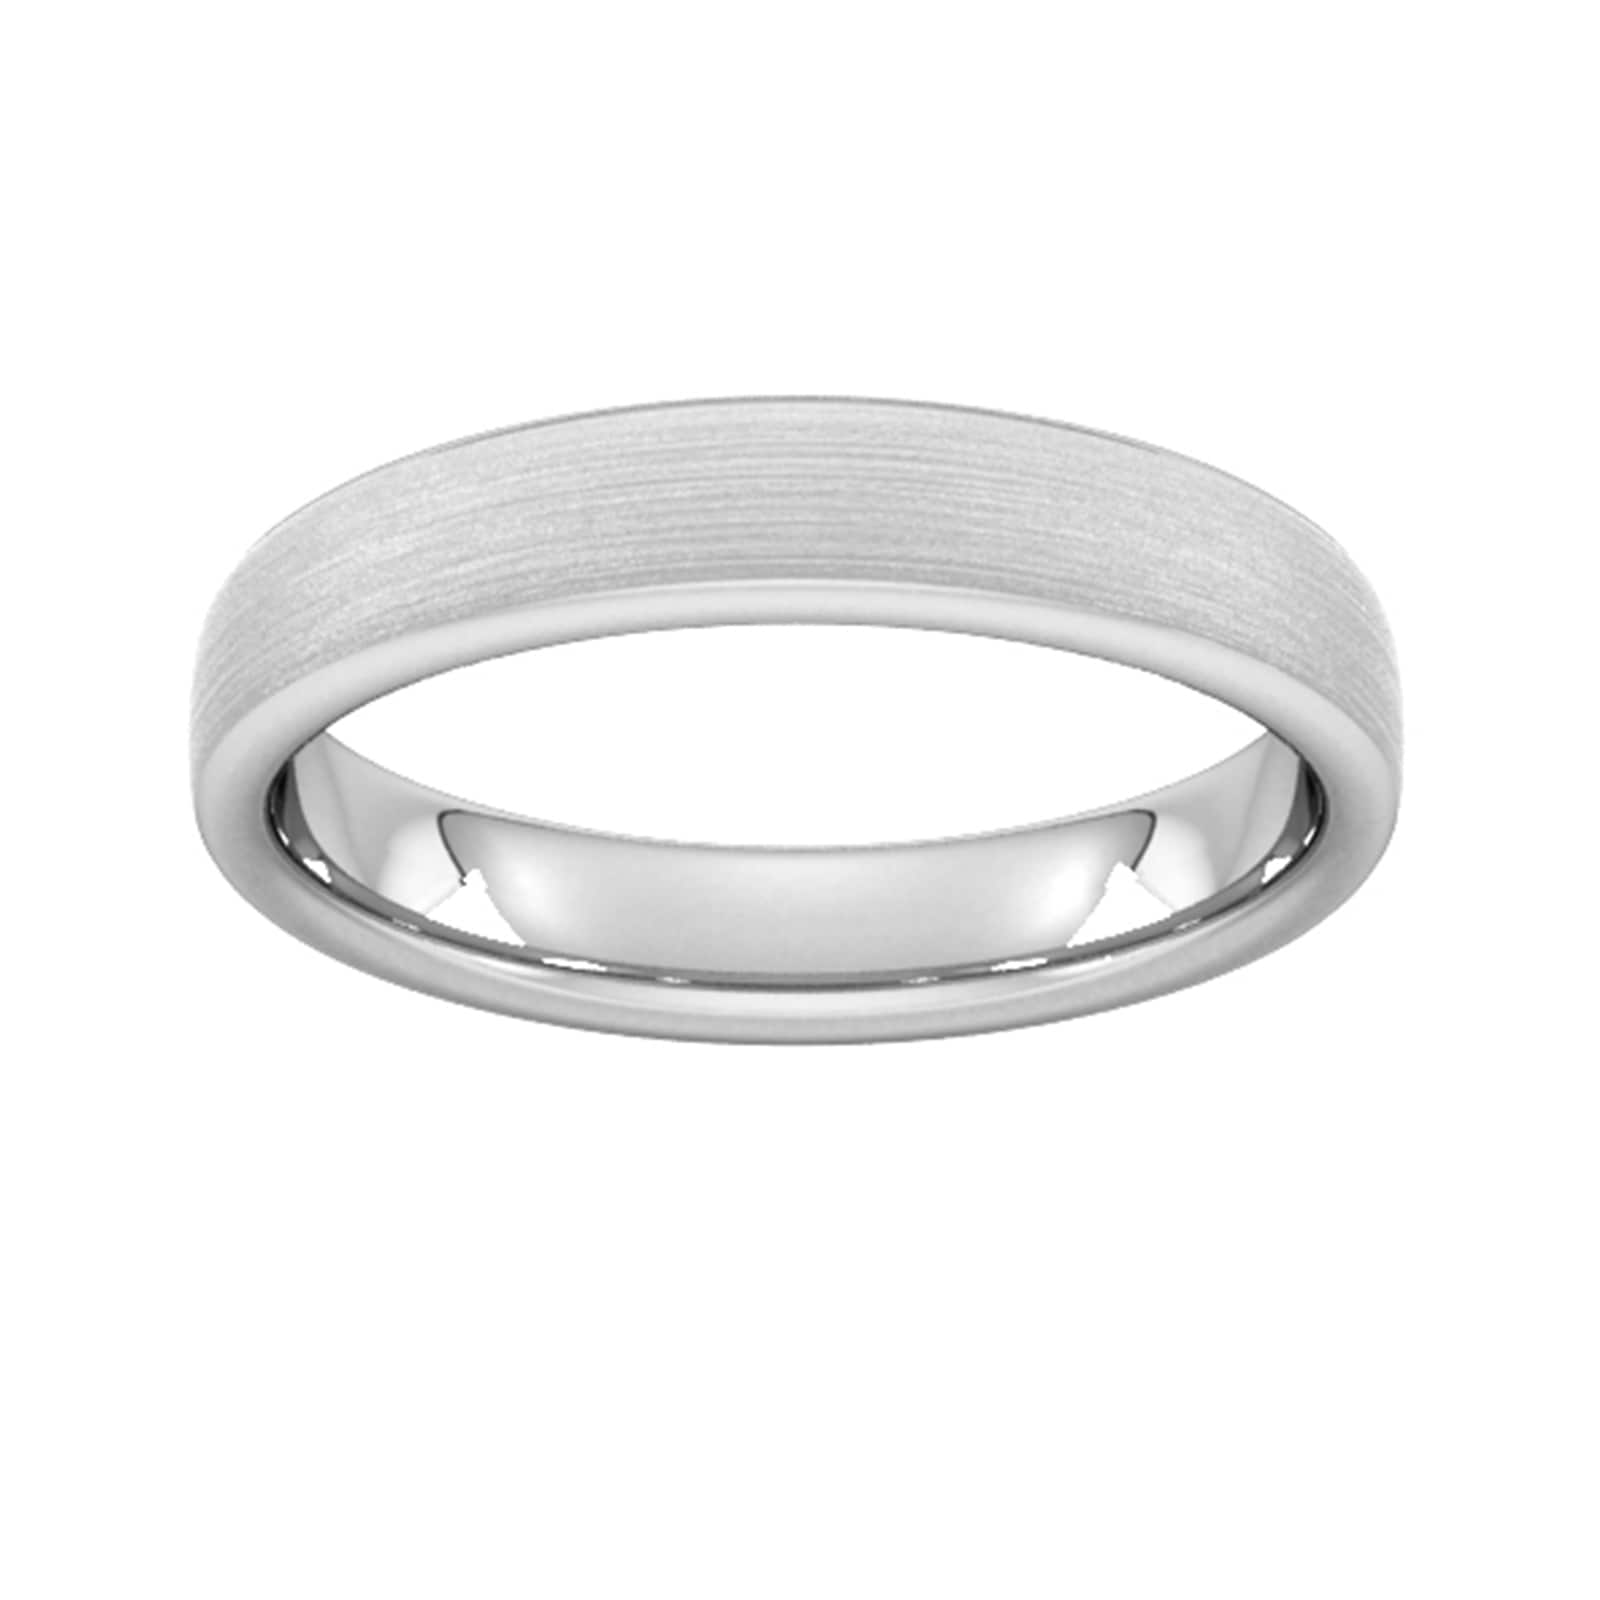 4mm Traditional Court Standard Matt Finished Wedding Ring In 18 Carat White Gold - Ring Size H